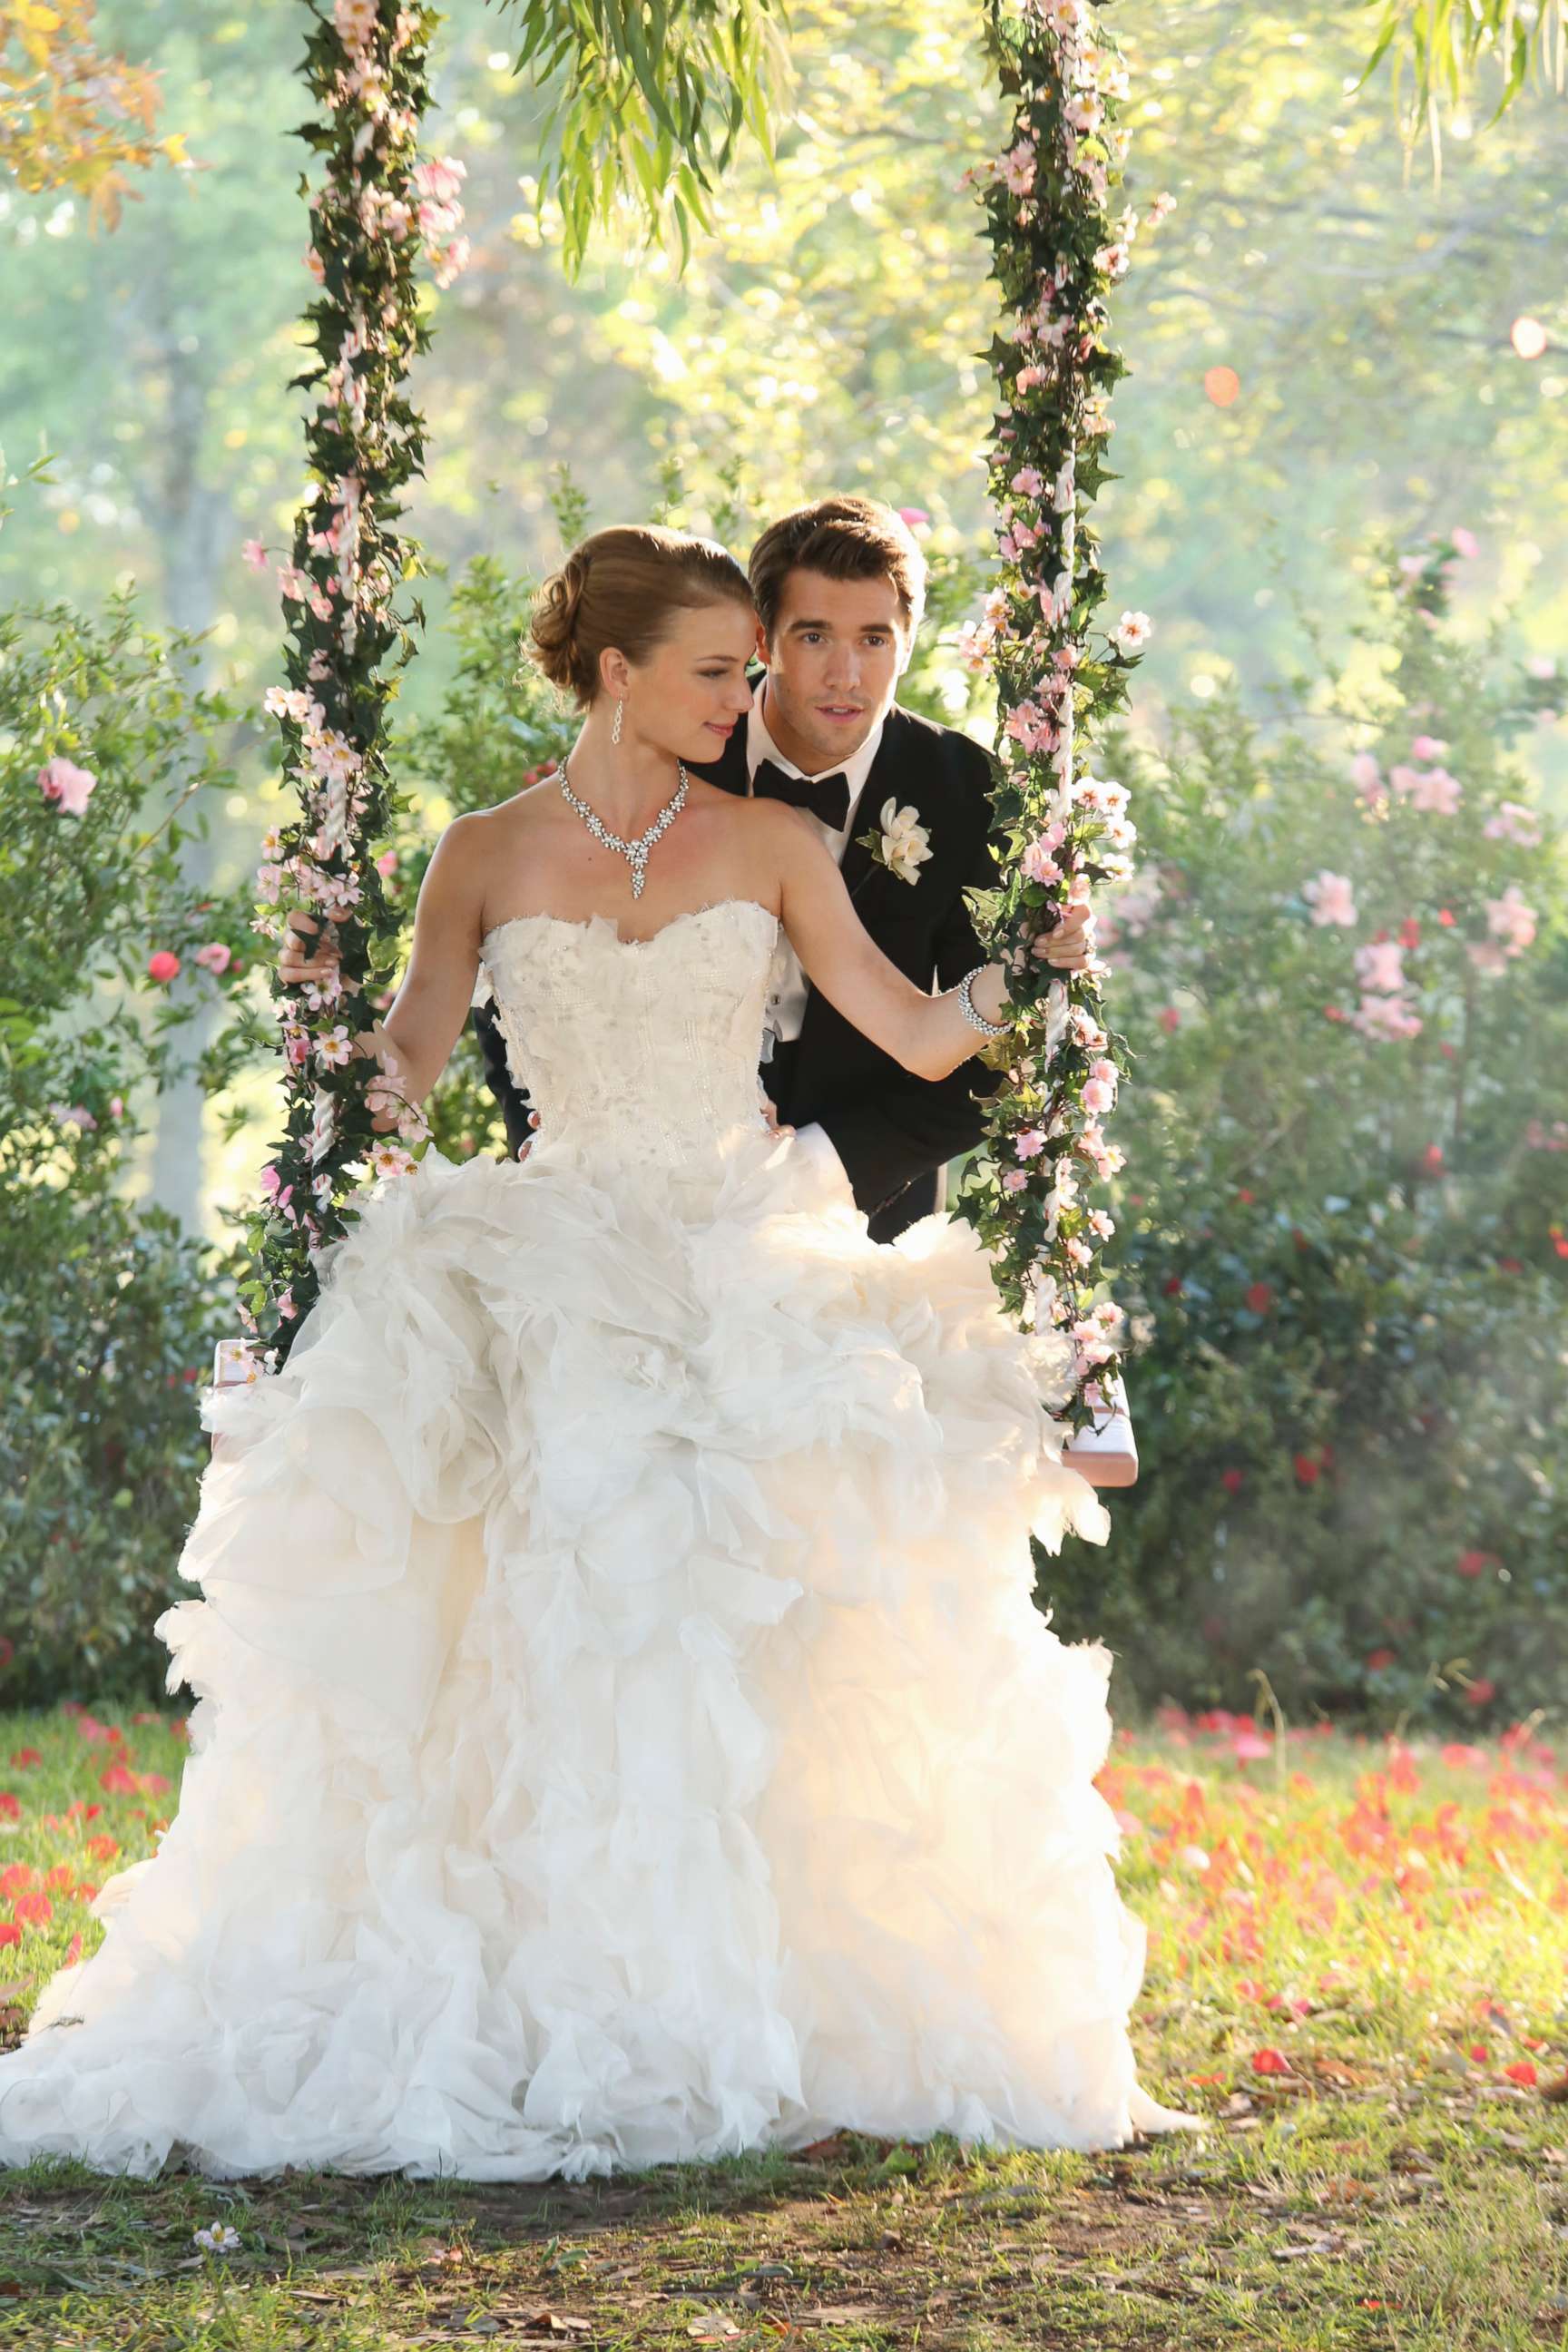 PHOTO: Emily VanCamp and Josh Bowman get married in a December 2013 episode of the show "Revenge," on ABC.